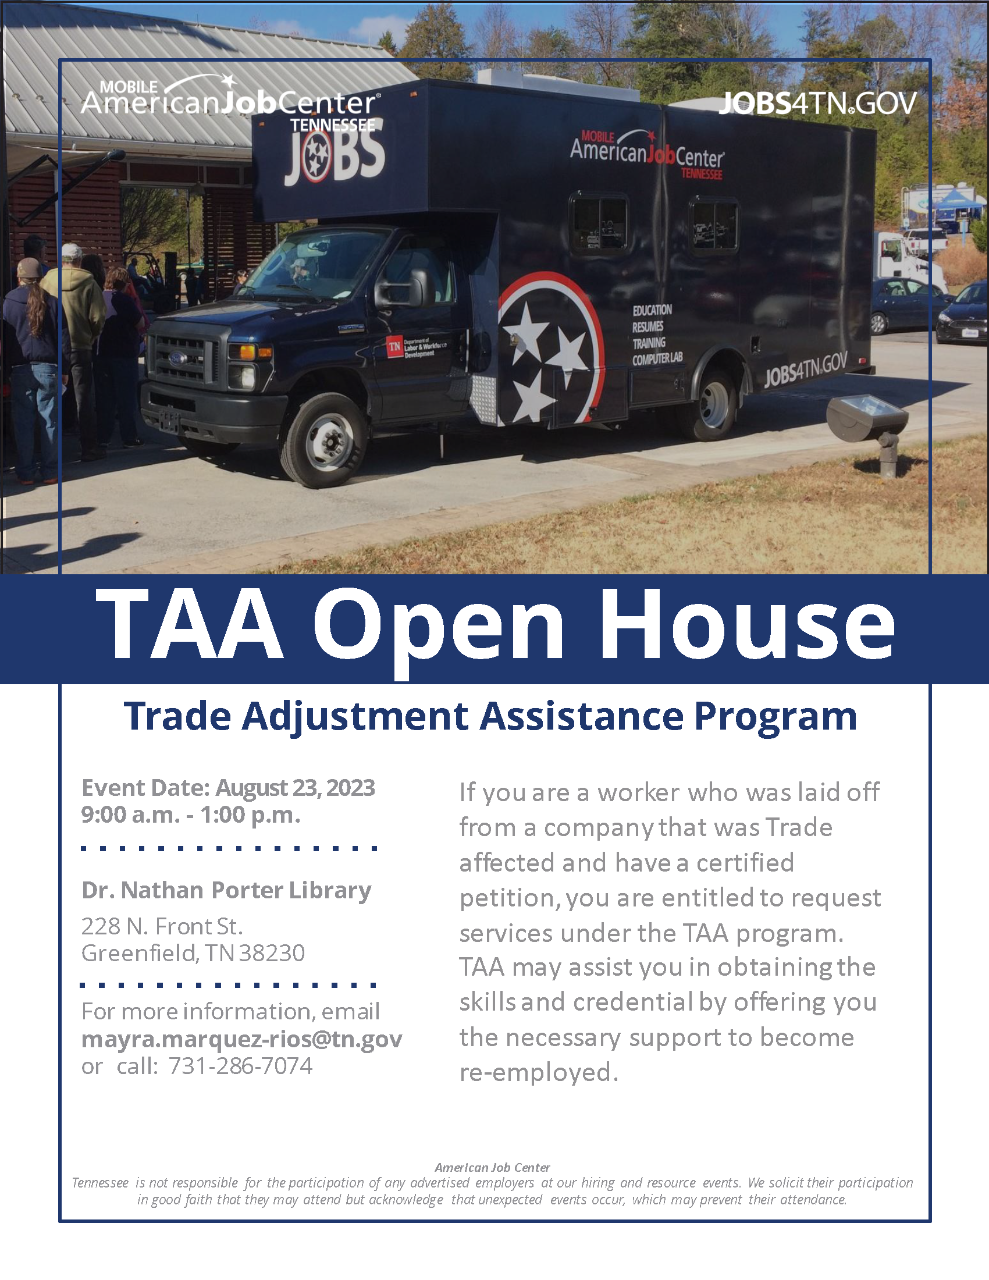 TAA Open House - Greenfield, TN, August 23, 2023, 9 a.m. to 1 p.m. CDT